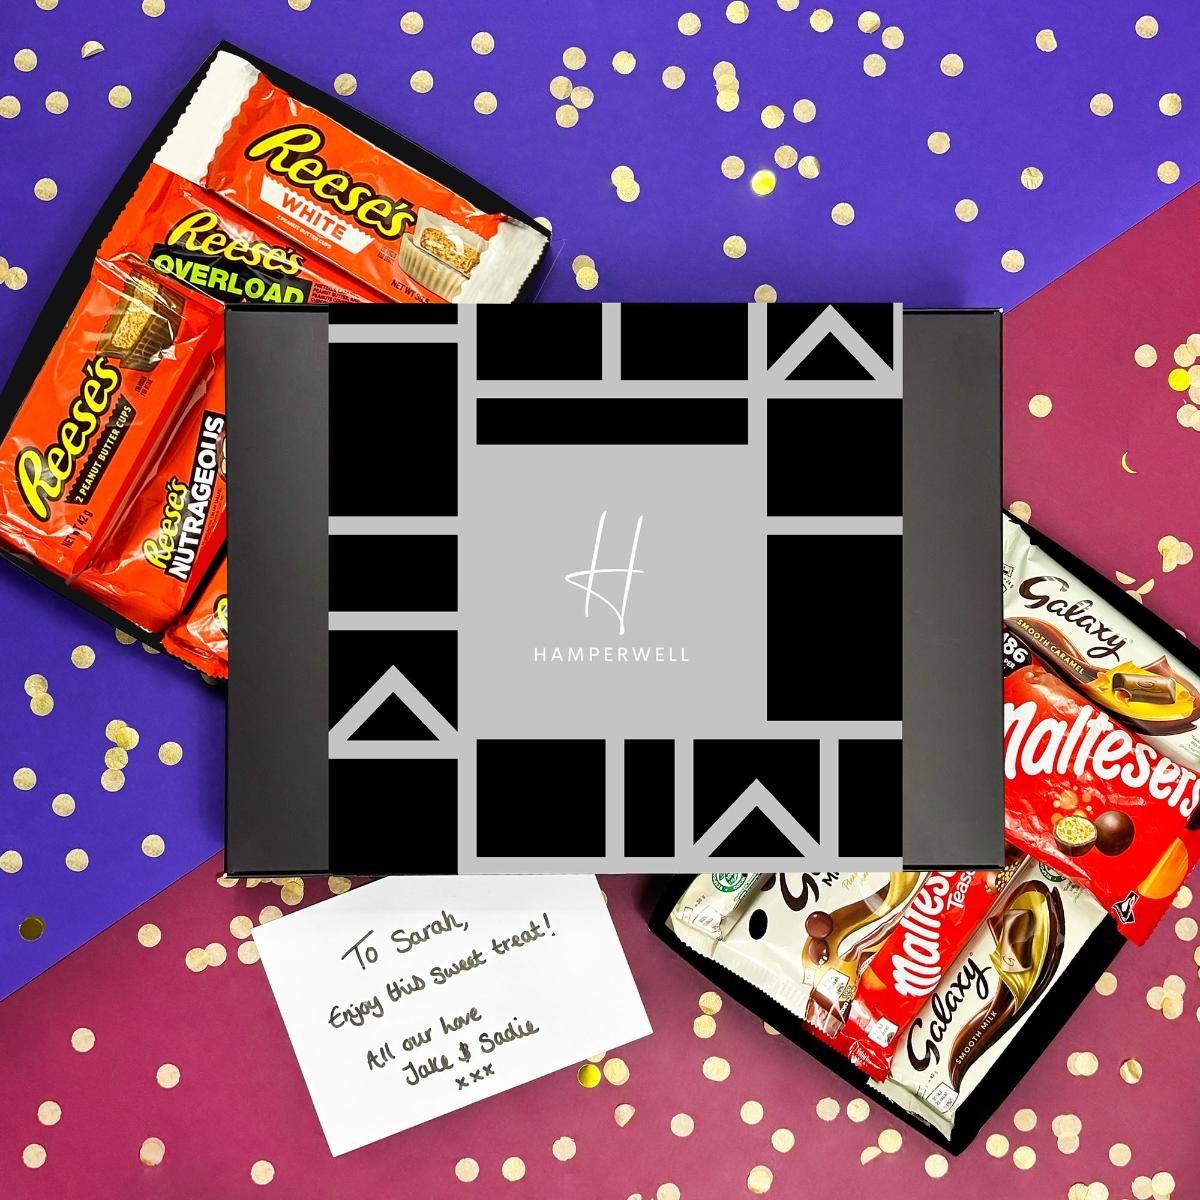 Reese’s Chocolate XL Mix & Match Letterbox Friendly Gift Hamper